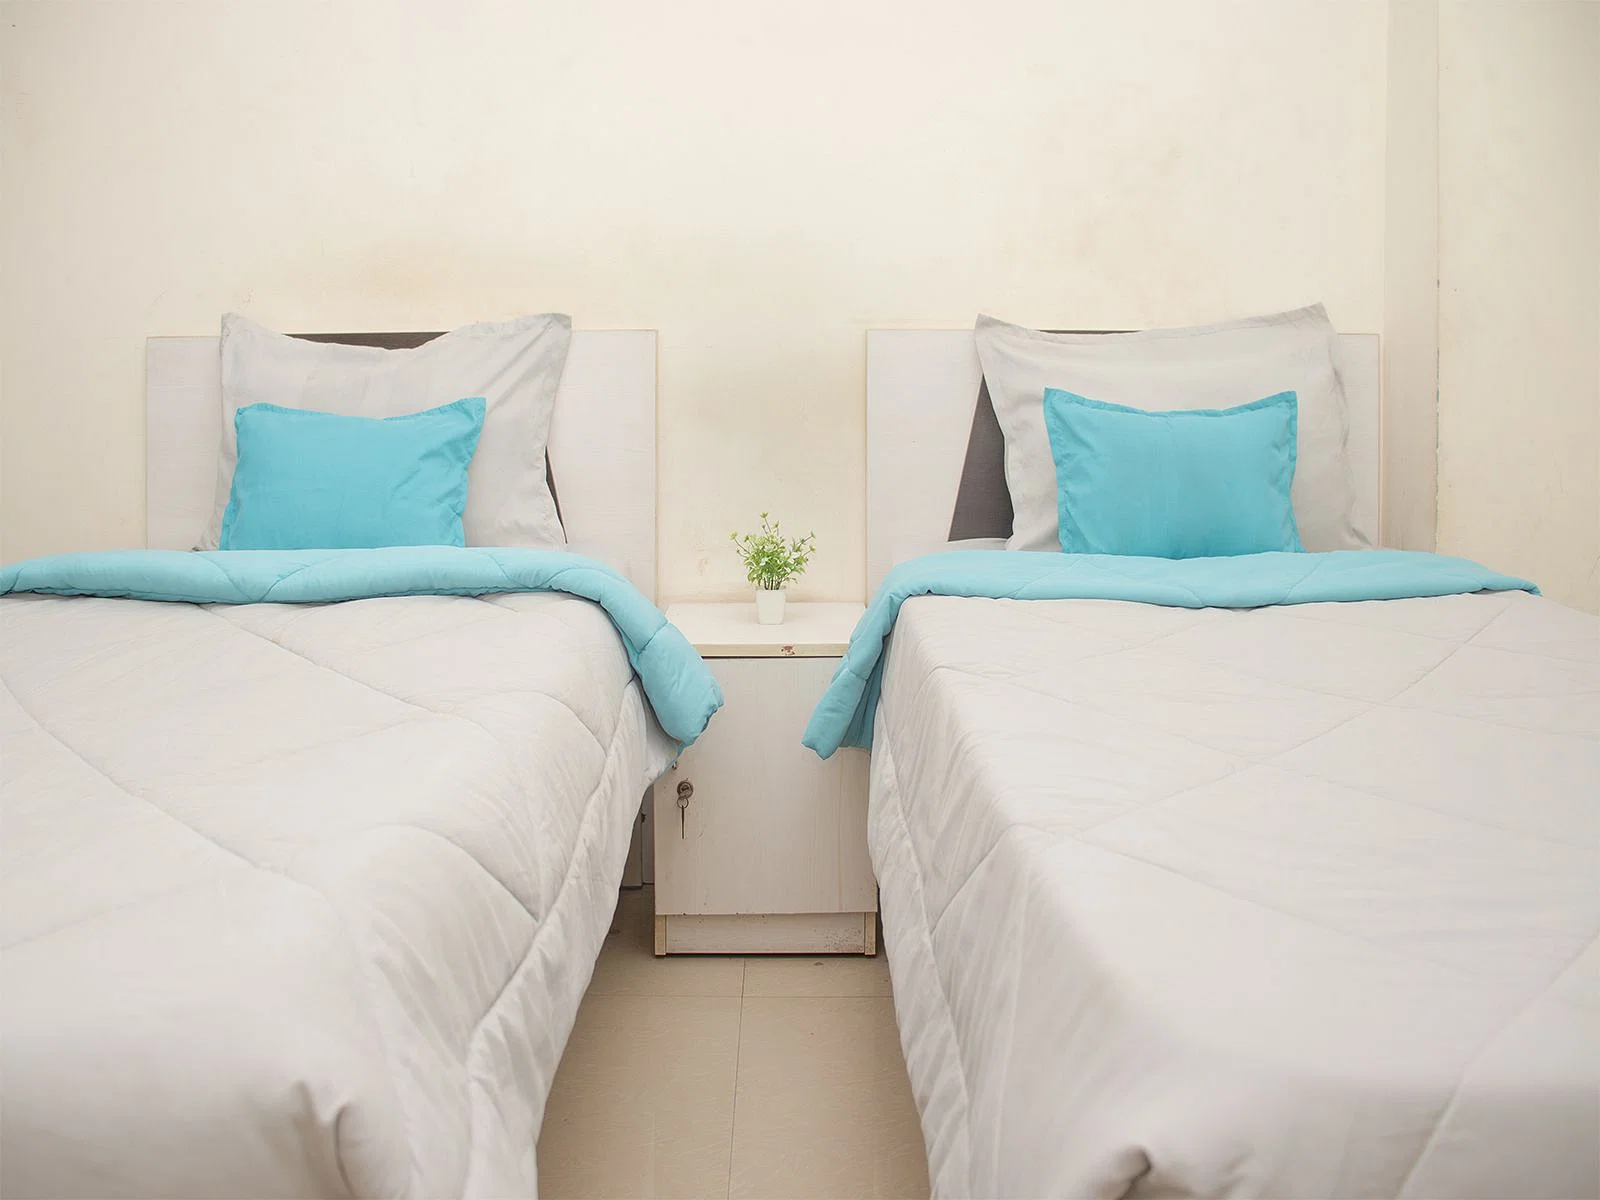 budget-friendly PGs and hostels for unisex with single rooms with daily hopusekeeping-Zolo Bright